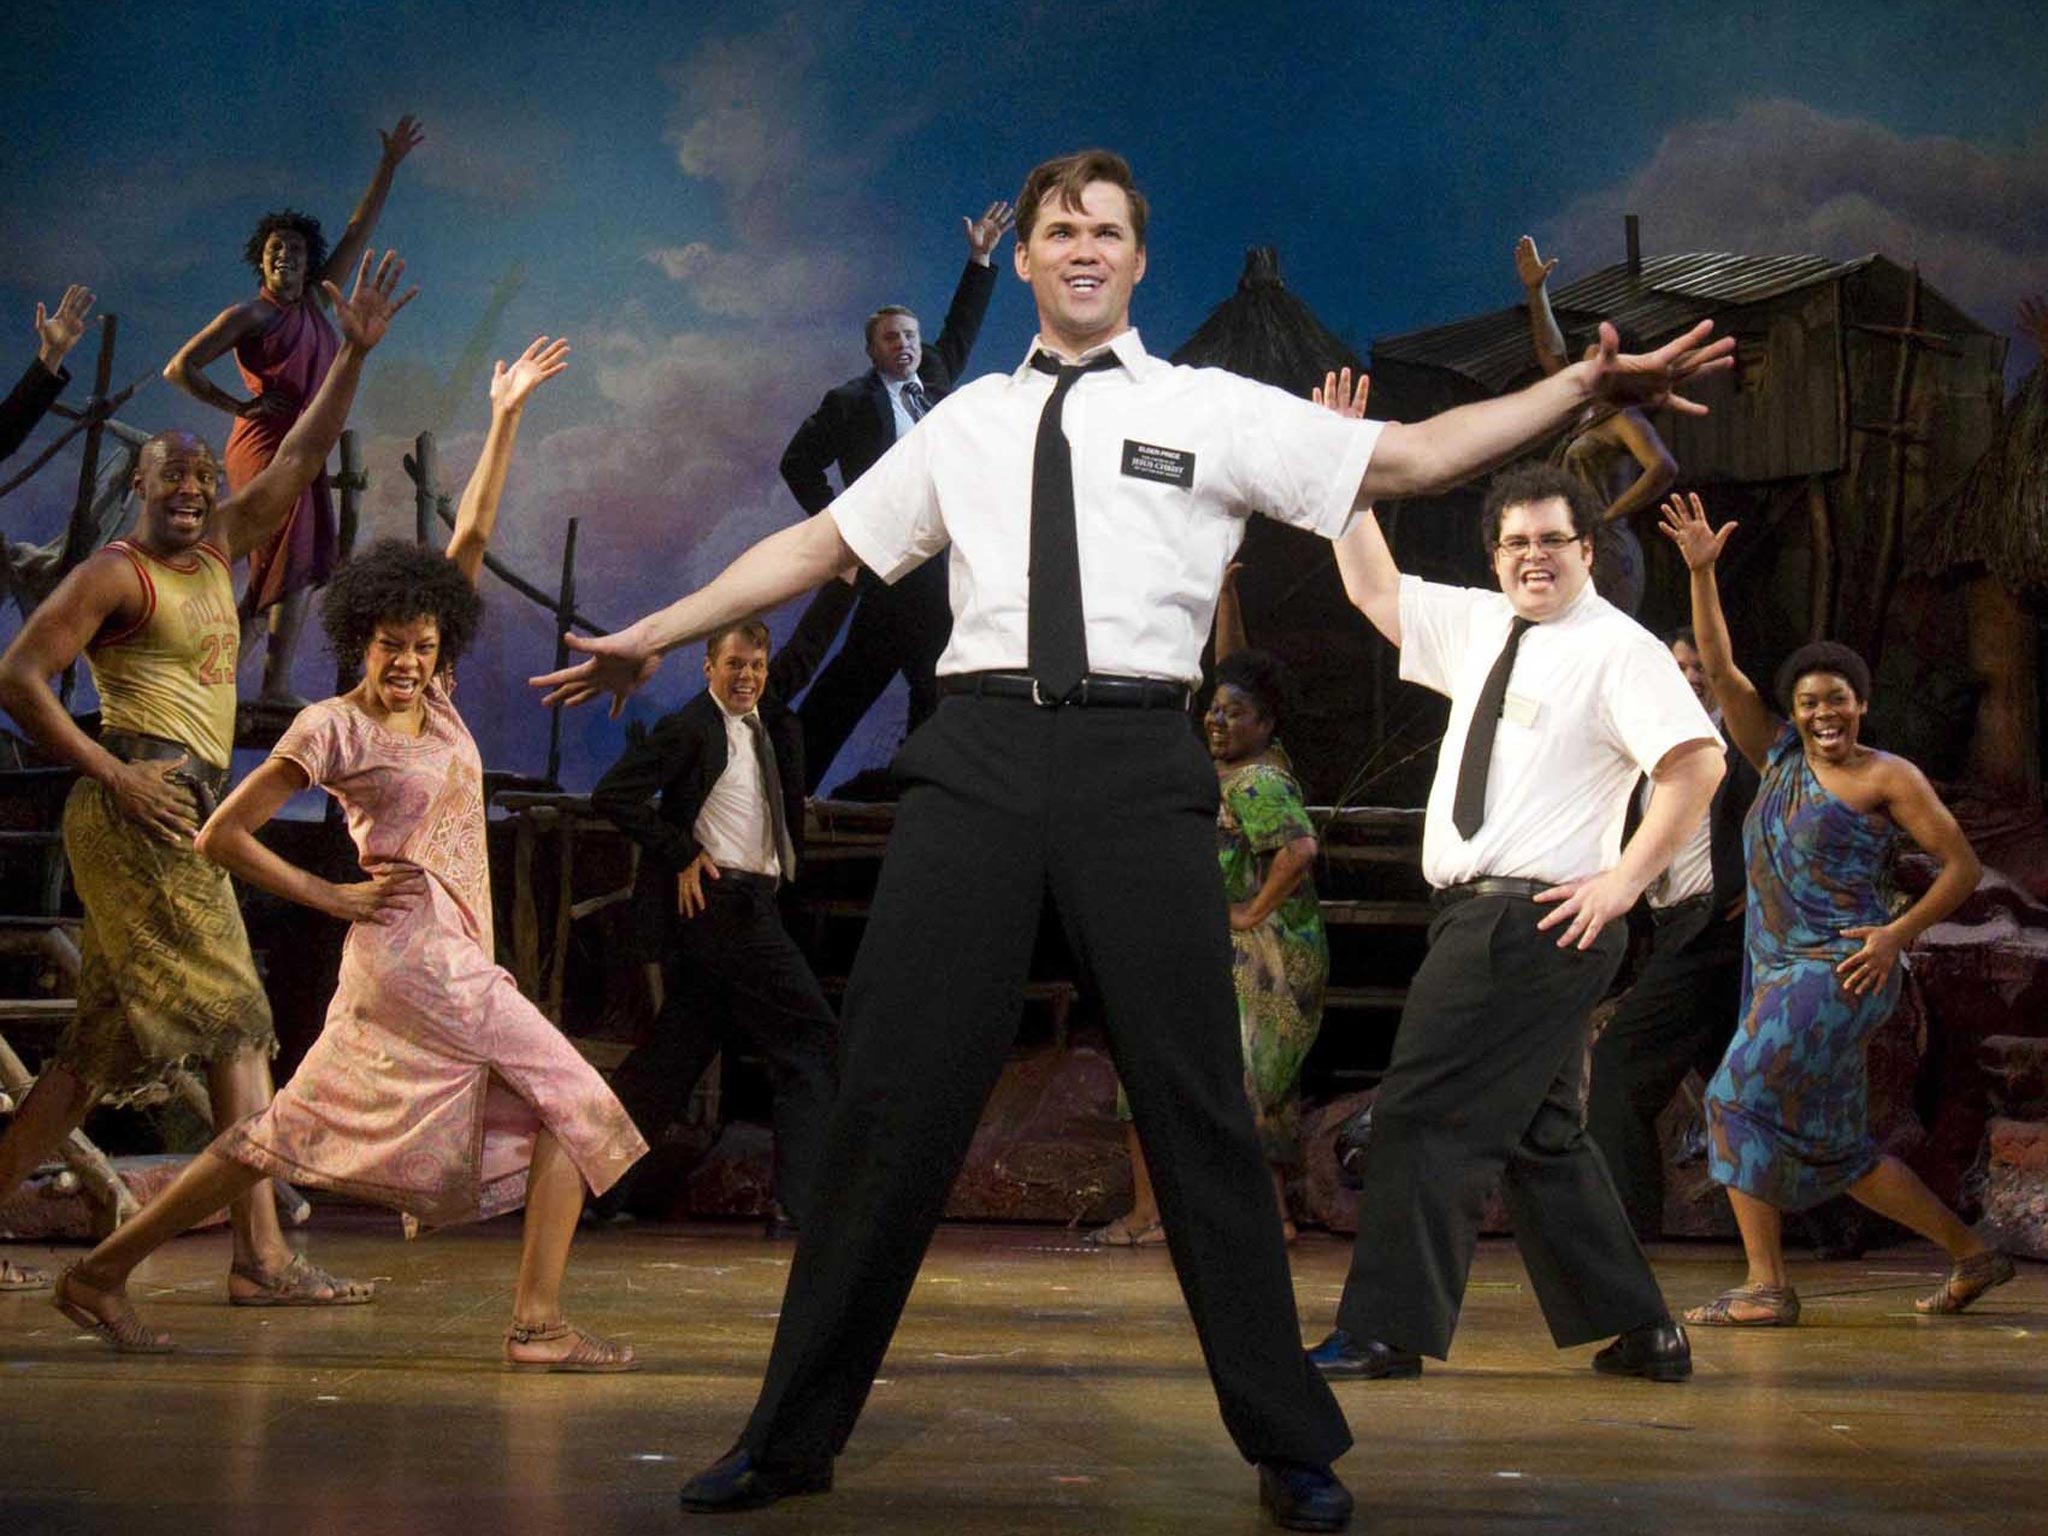 ‘The Book of Mormon’ is one of the most popular musicals on Broadway